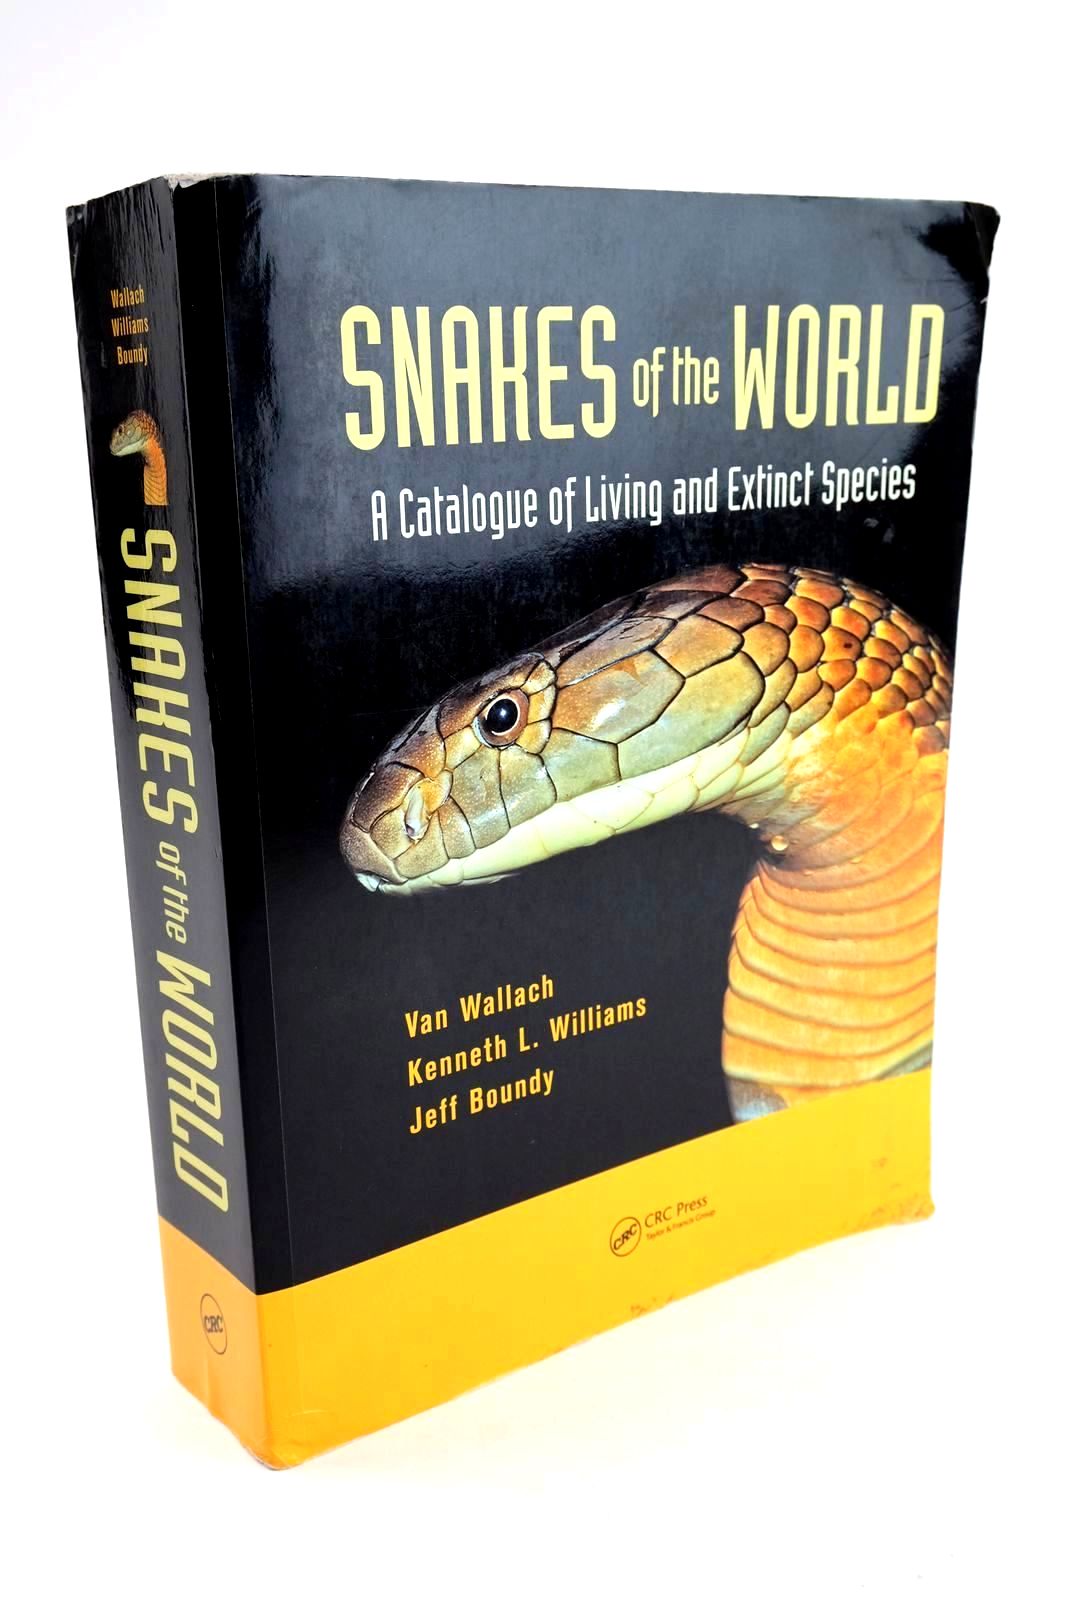 Photo of SNAKES OF THE WORLD A CATALOGUE OF LIVING AND EXTINCT SPECIES written by Wallach, Van Williams, Kenneth L. Boundy, Jeff published by CRC Press (STOCK CODE: 1324051)  for sale by Stella & Rose's Books